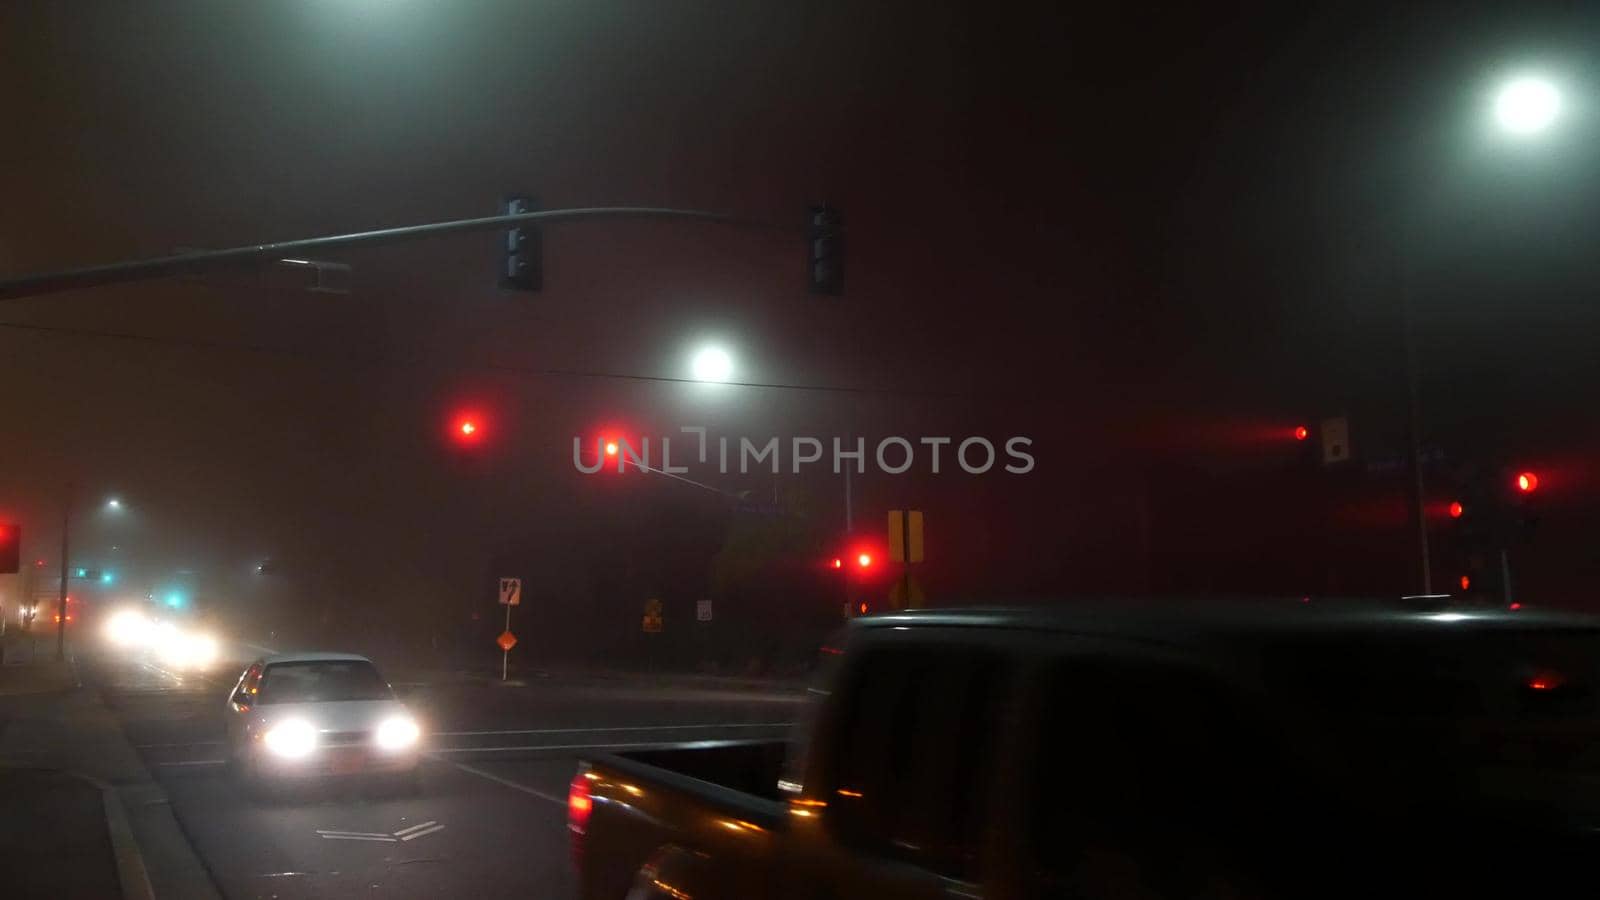 VISTA, CALIFORNIA USA - 24 JAN 2020: Marine layer, dense fog on driveway crossroad at night. June gloom, misty nebulous bad weather. Dangerous low visibility on road intersection. Car traffic safety by DogoraSun